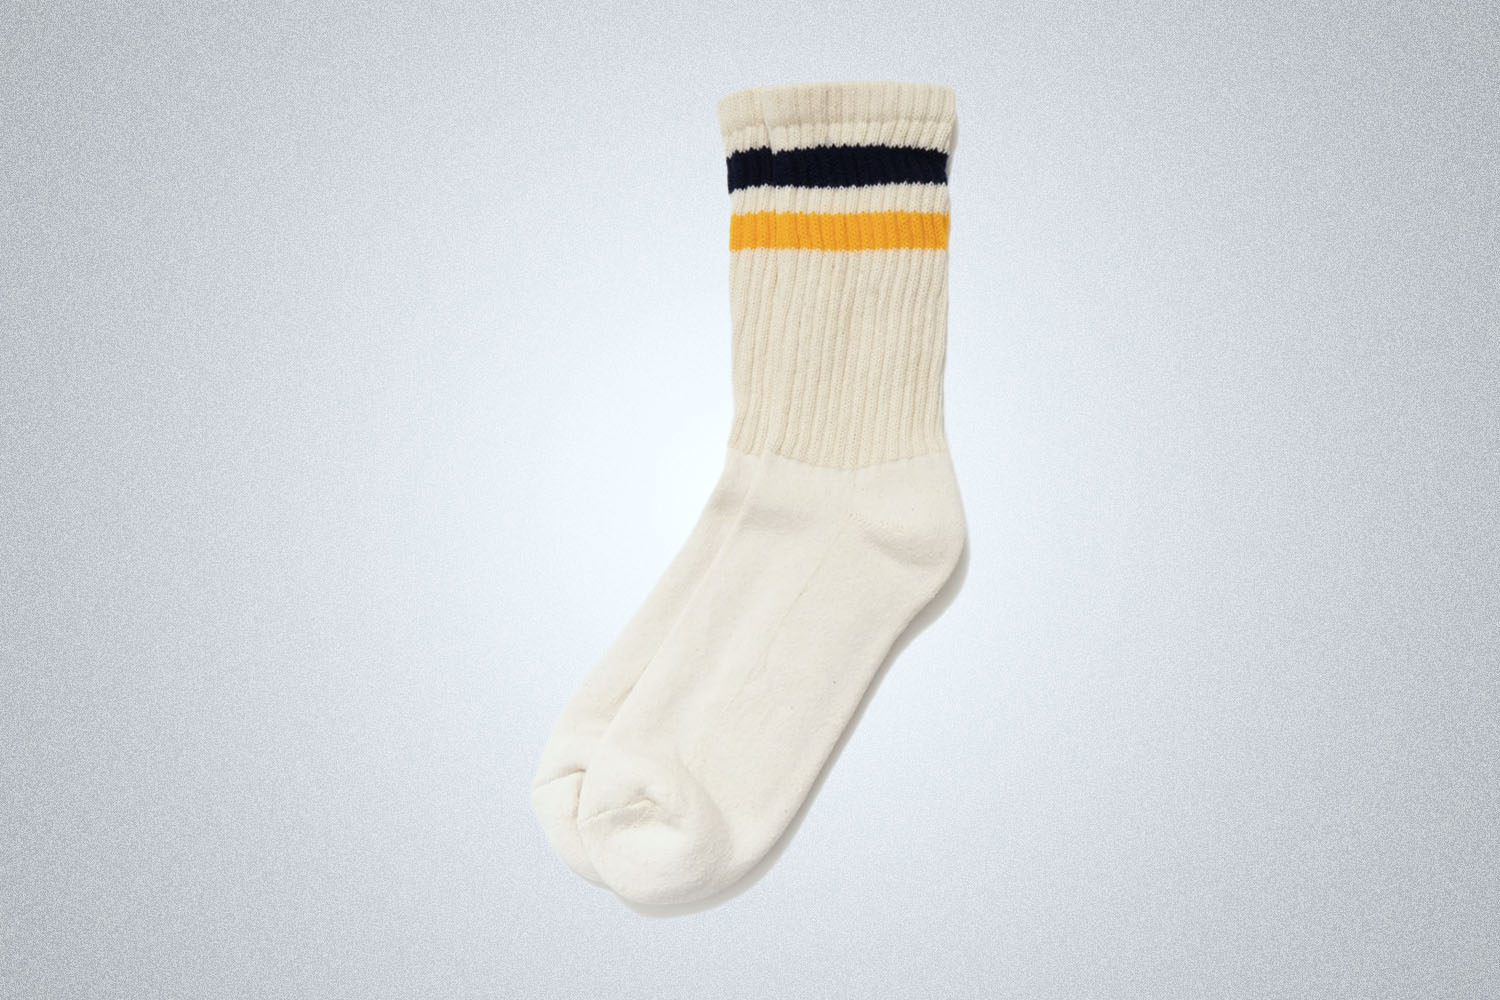 a pair of socks on a grey background